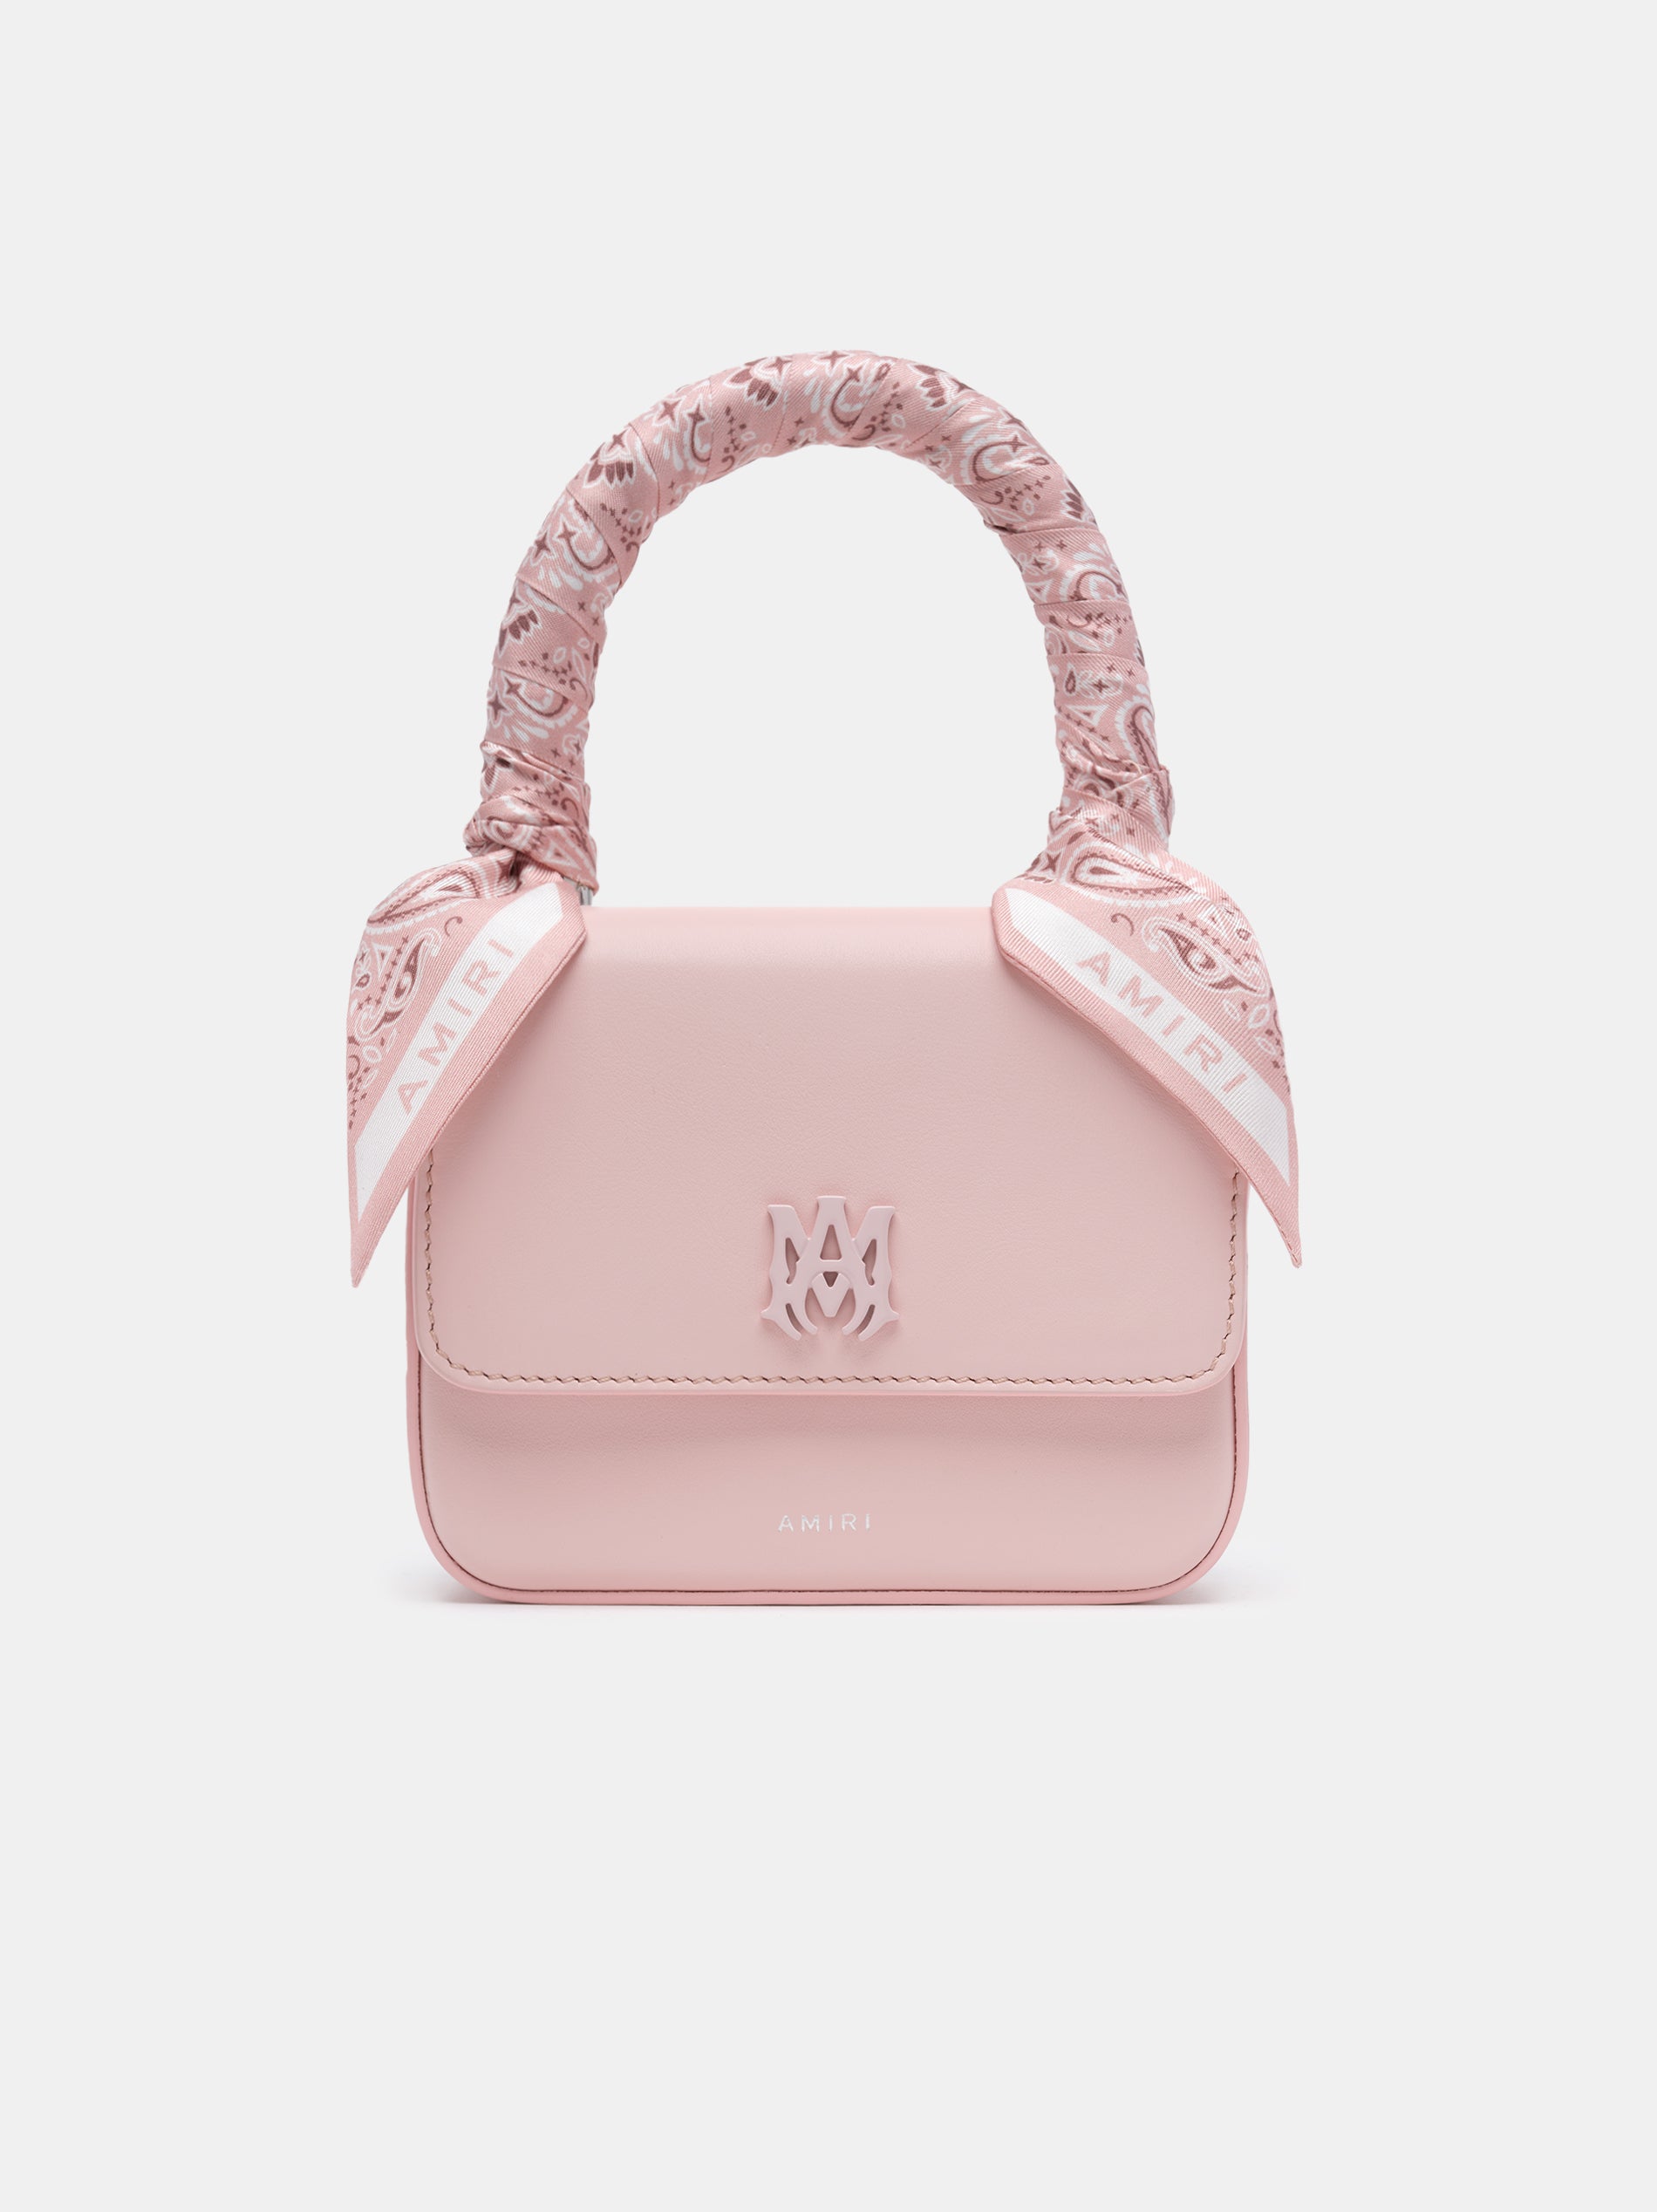 Product WOMEN - MICRO MA BAG - Pink featured image